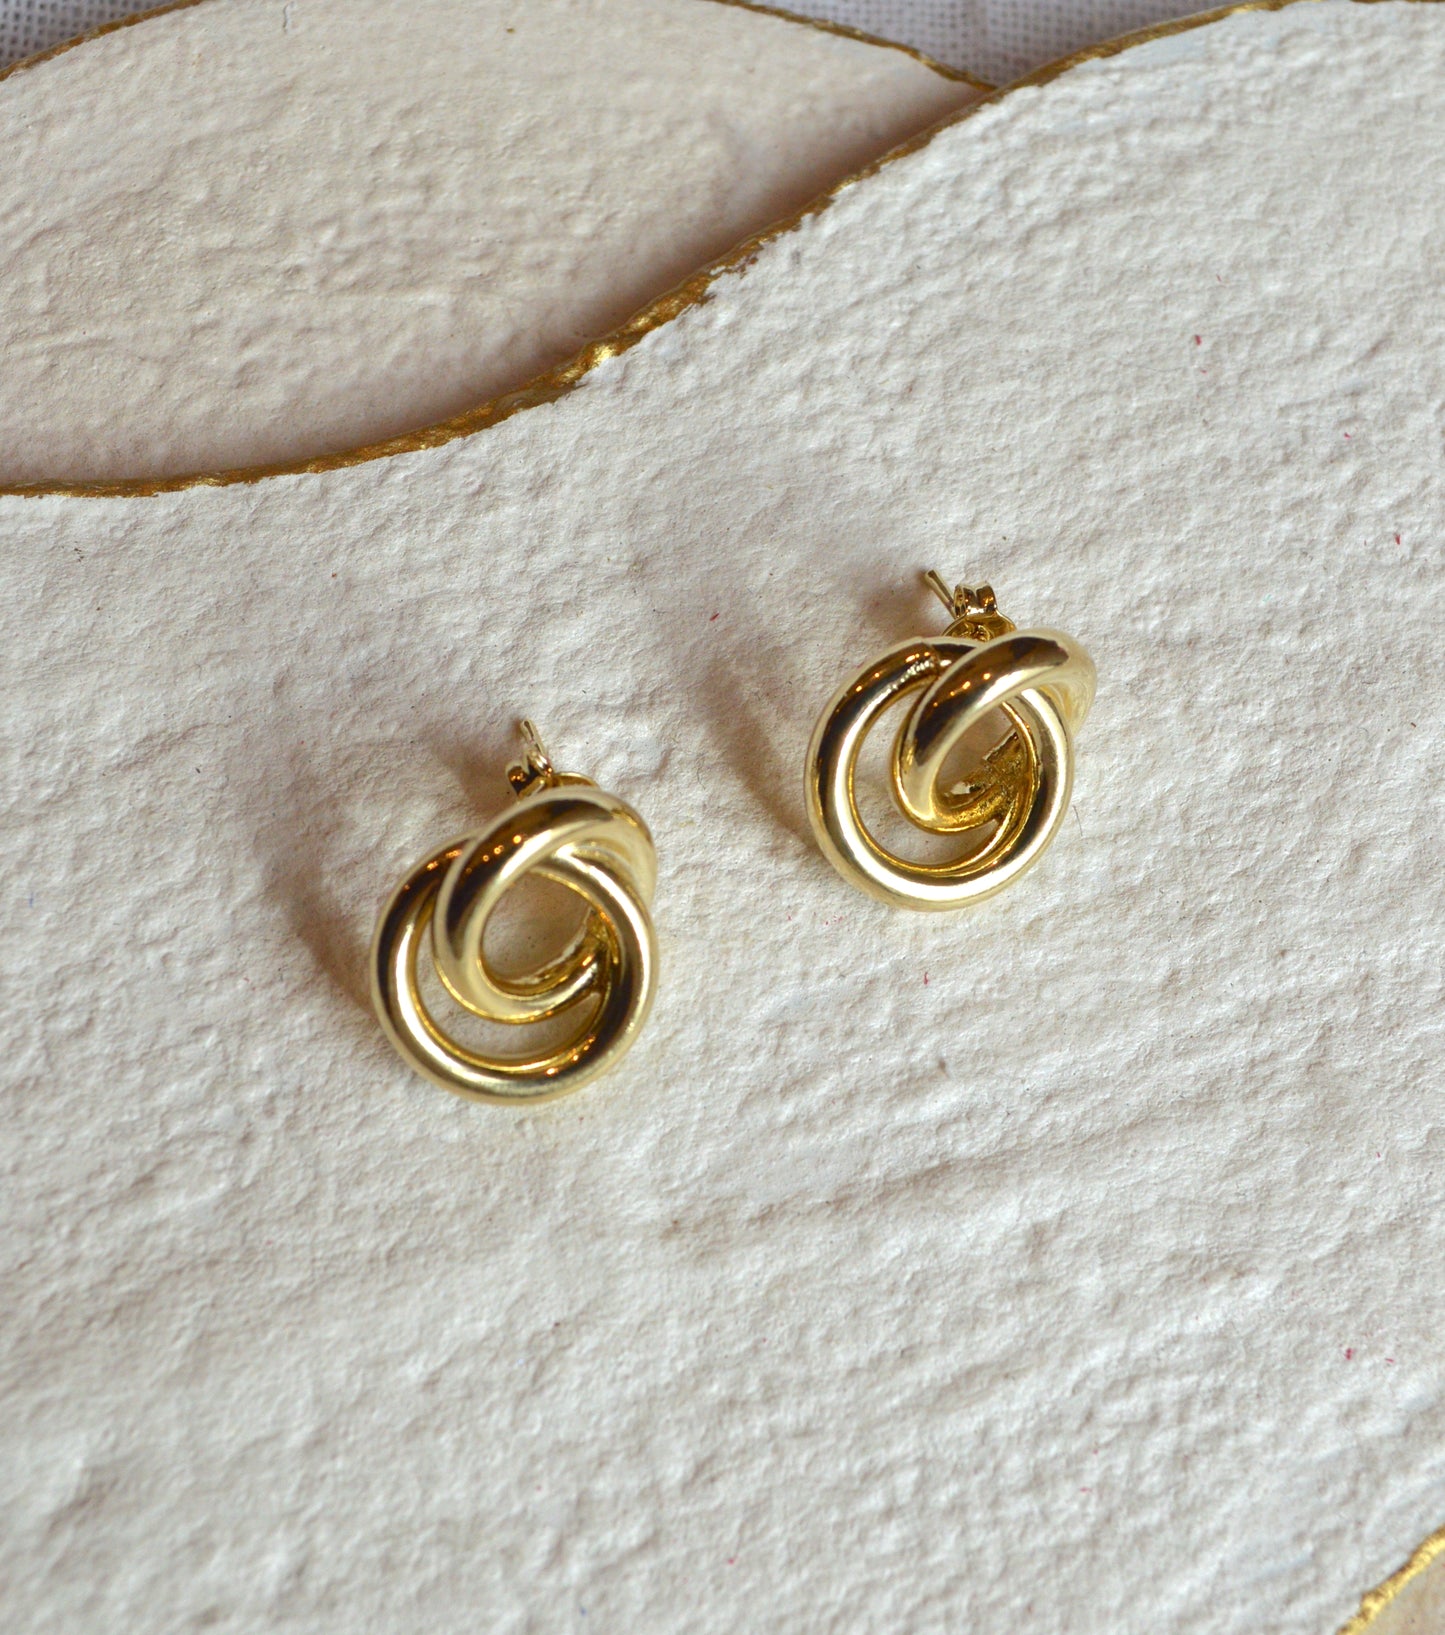 18k gold-filled double circle knot studs